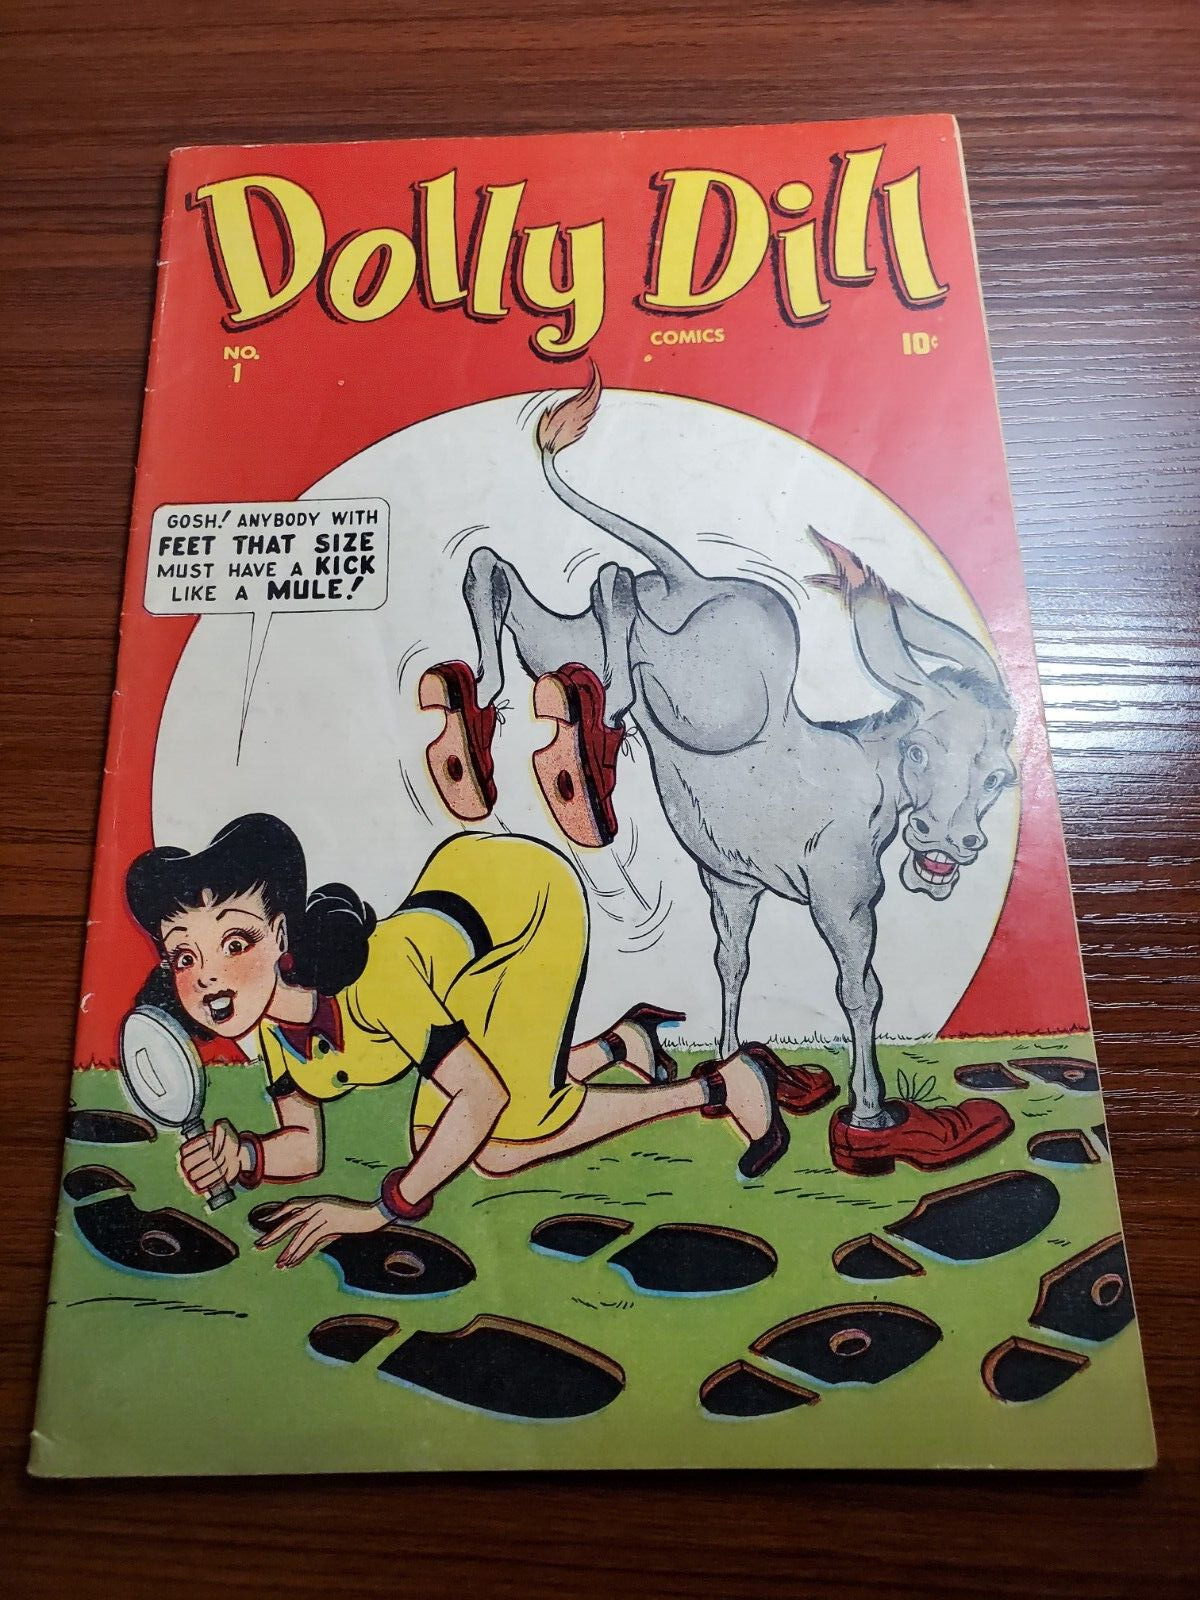 Dolly Dill #1 1945 one-off, Good Girl art, scarce, solid mid-grade copy